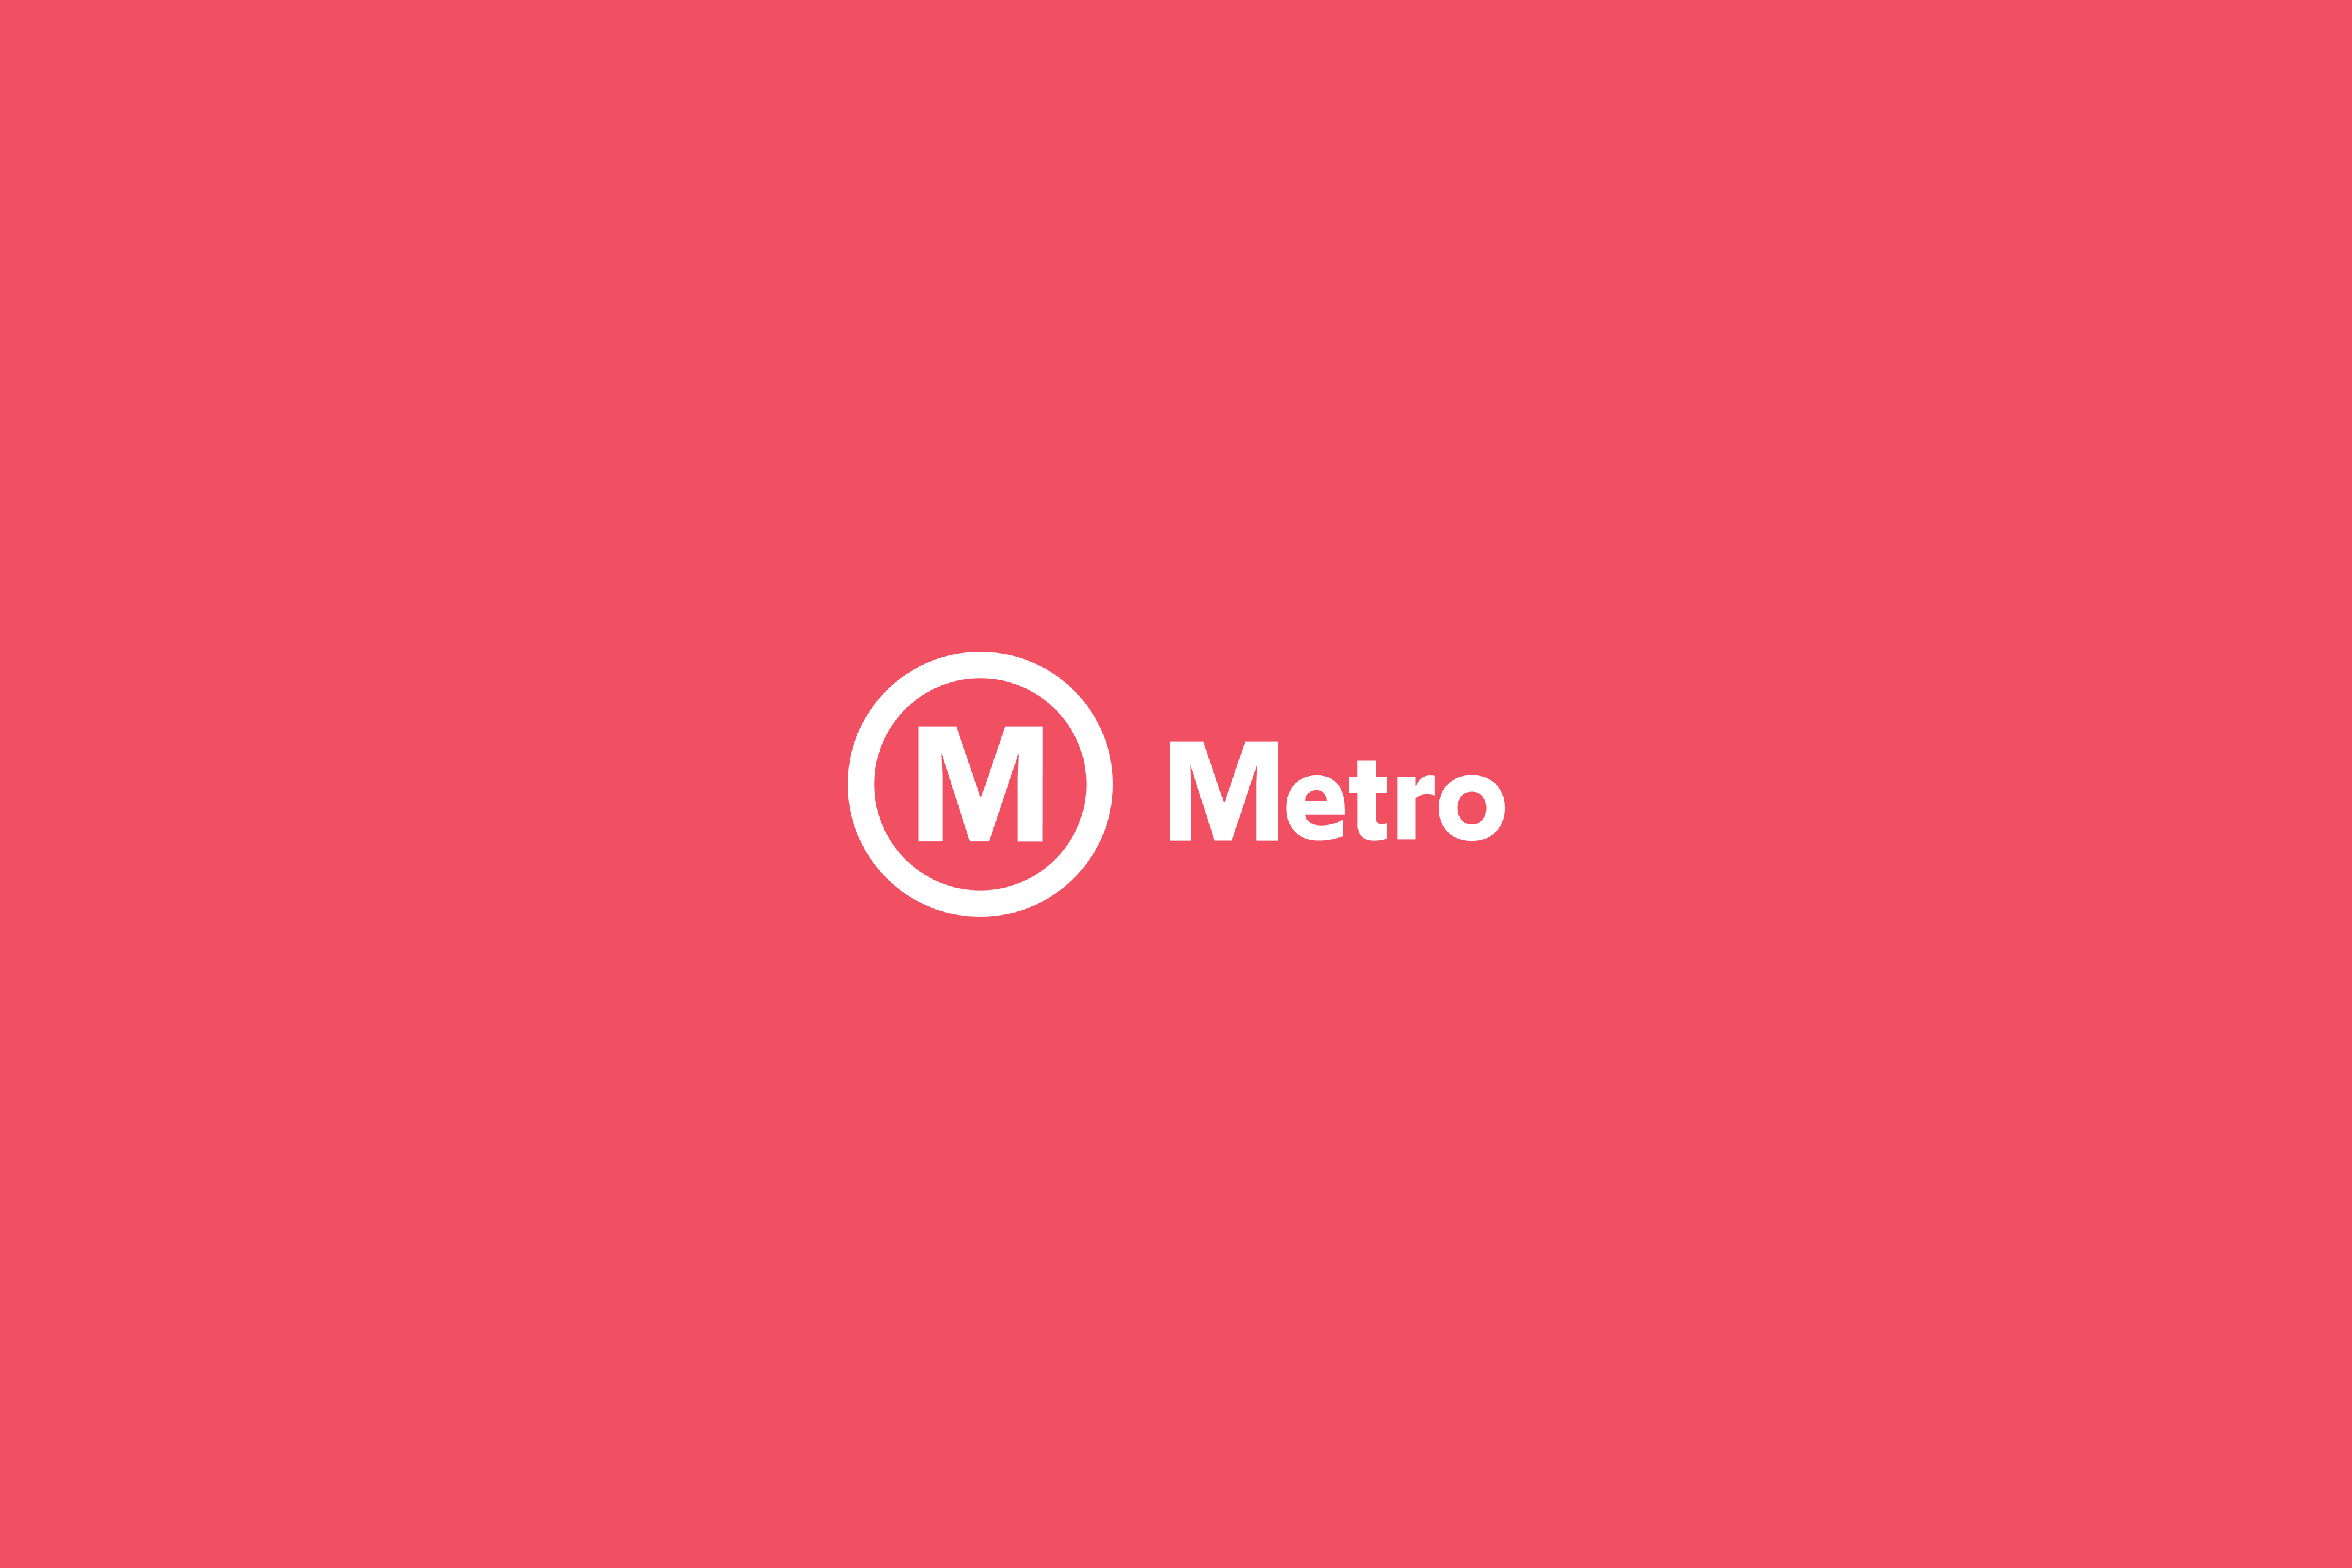 How can West Yorkshire Metro shift towards a user-centered approach? - Part 1 The Brand 2